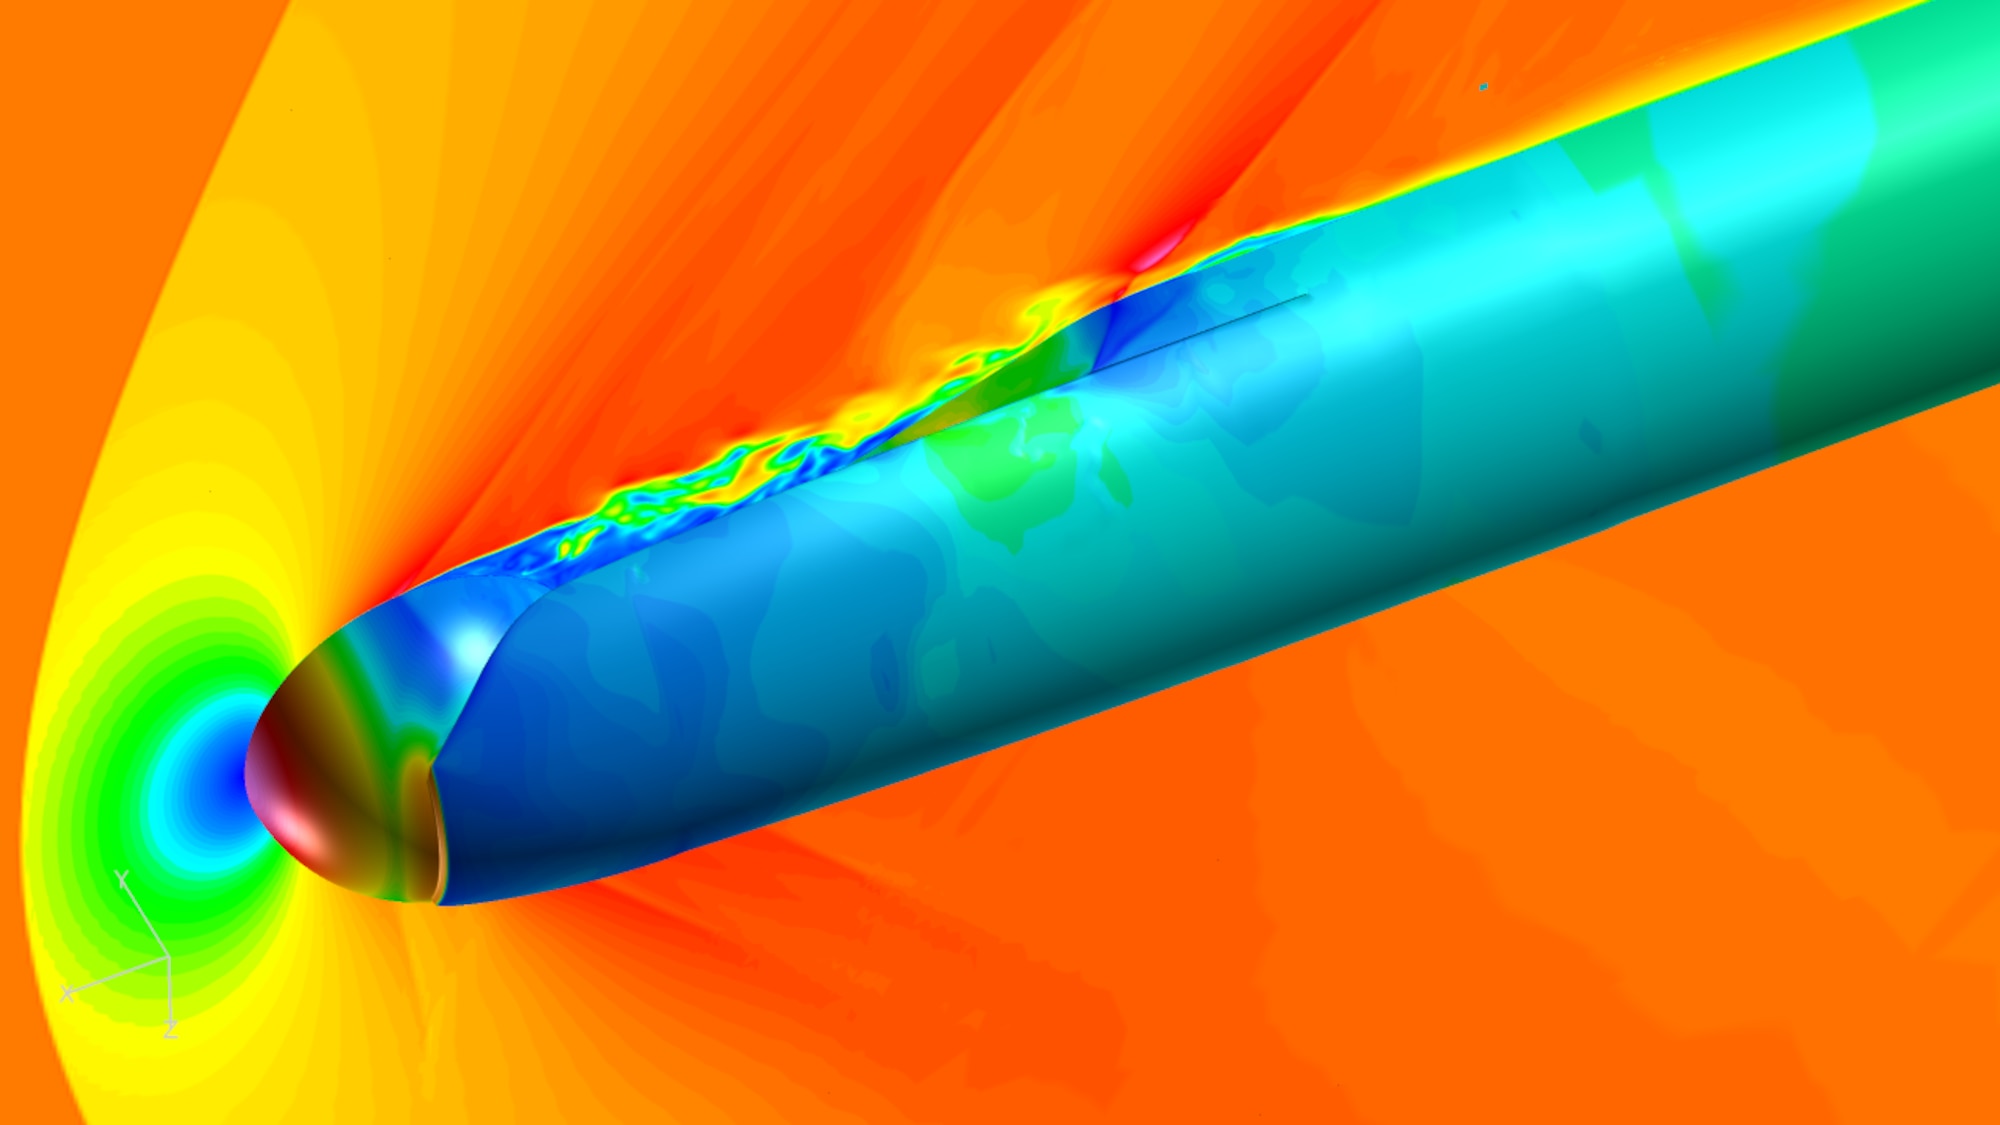 Computational fluid dynamics simulations for the directed energy pod show pressure loading on the pod and flow features off-body for supersonic conditions. (Image courtesy of MZA Associates Corp.)